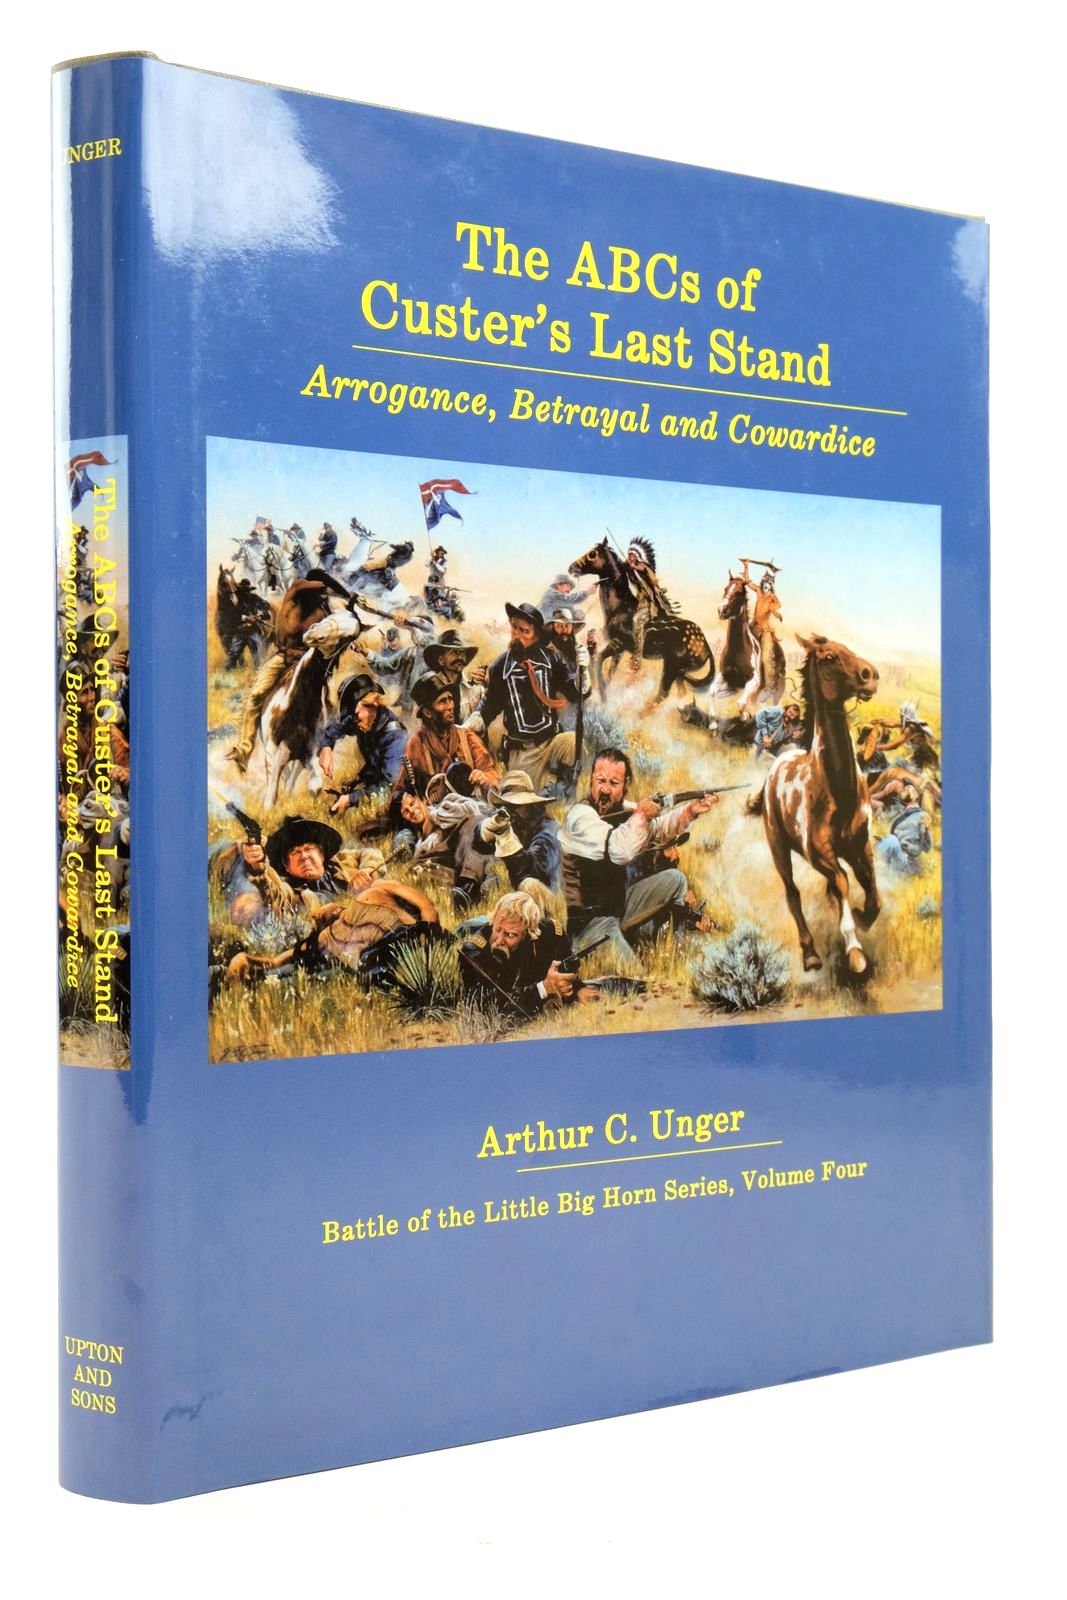 Photo of THE ABCS OF CUSTER'S LAST STAND: ARROGANCE, BETRAYAL AND COWARDICE written by Unger, Arthur C. published by Upton And Sons, Publishers (STOCK CODE: 2137869)  for sale by Stella & Rose's Books